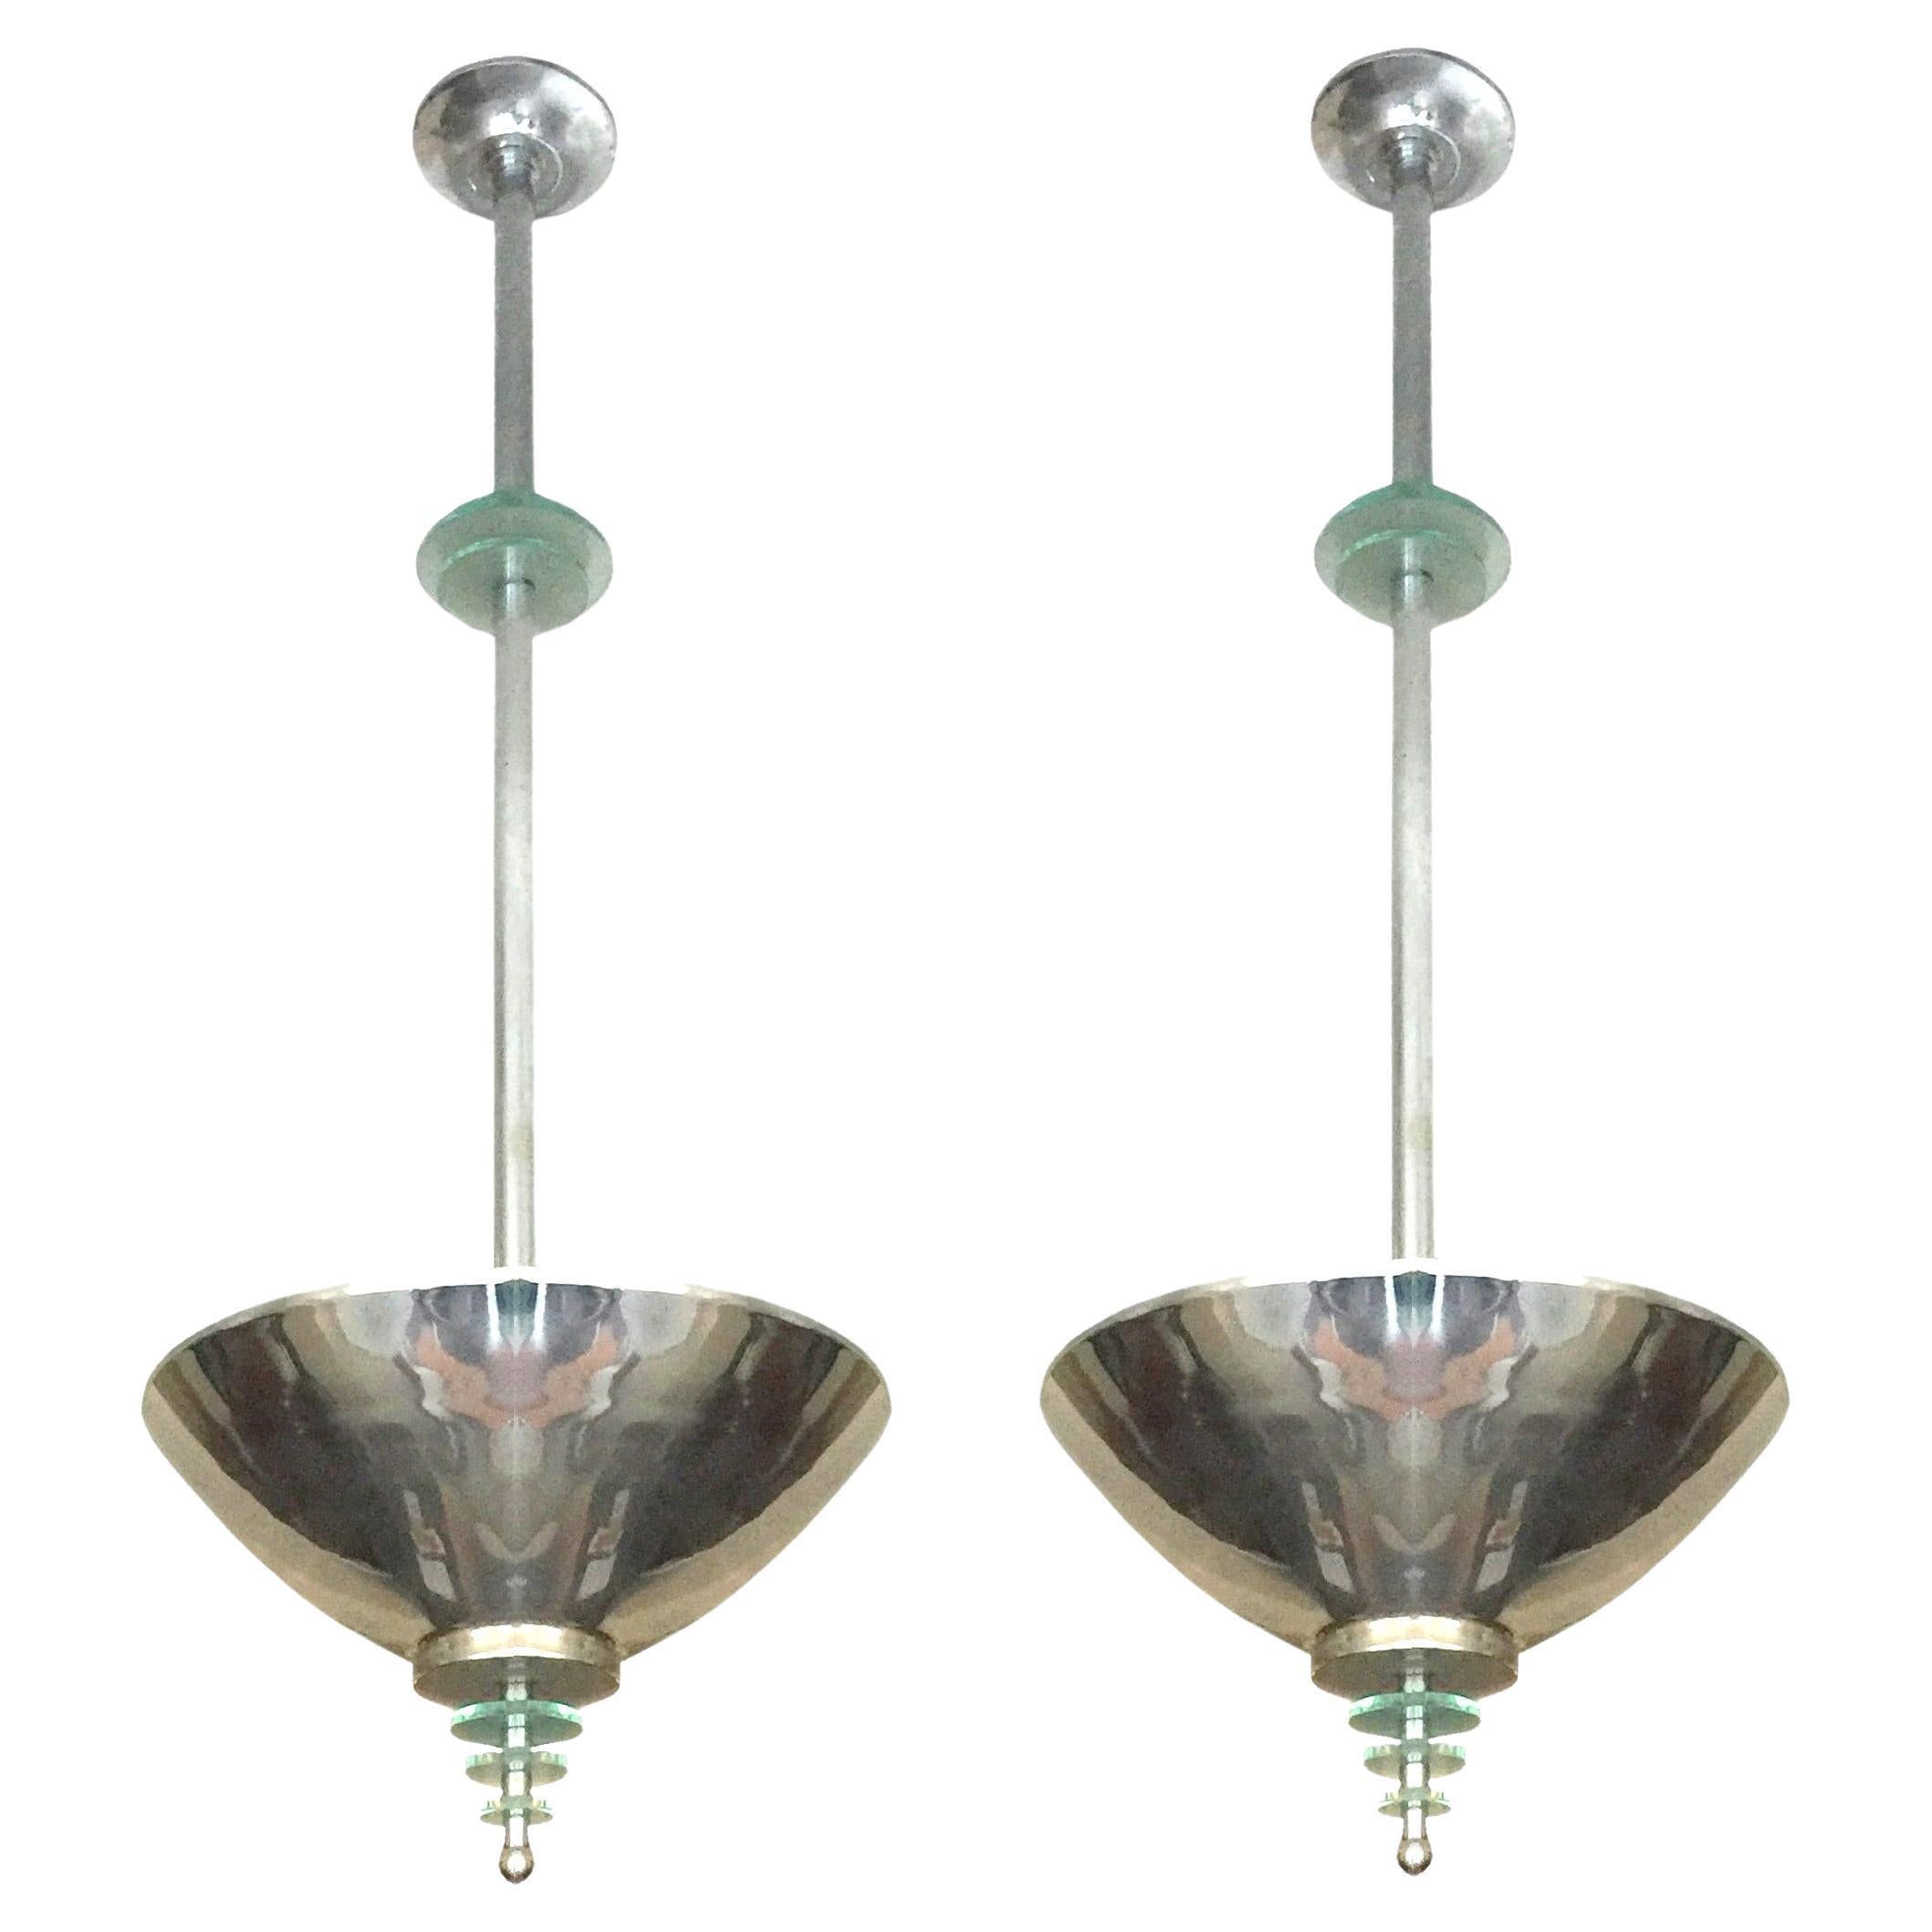 Amaizing Pair of Art Deco Chandeliers in Glass and Chrome, Style, 1935